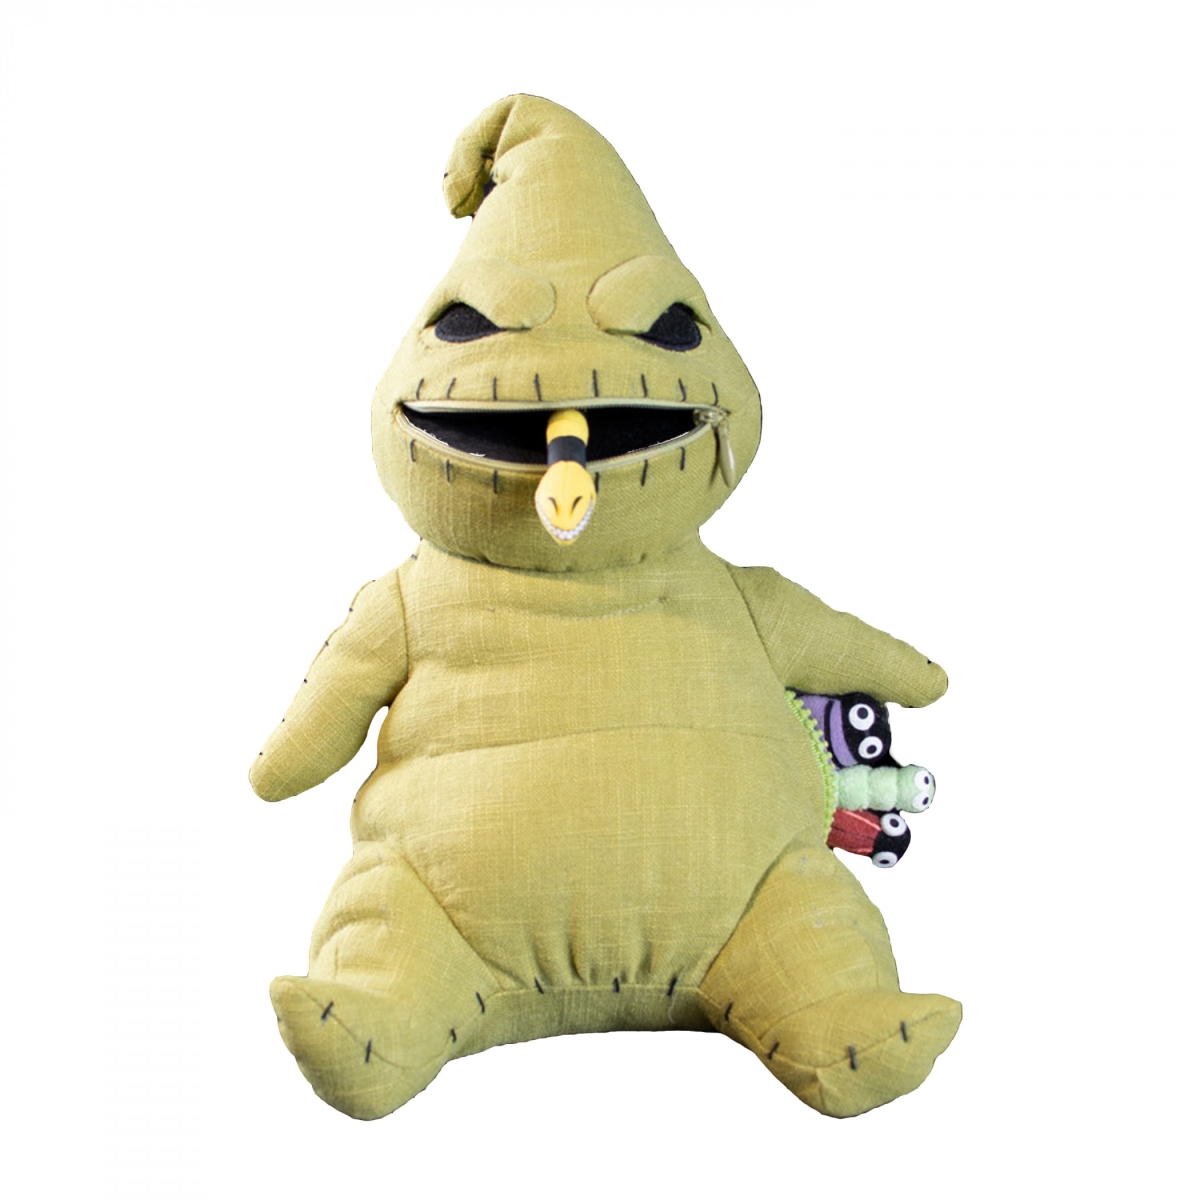 Picture of Nightmare Before Christmas 863677 The Nightmare Before Christmas Oogie Boogie Zippermouth Plush Figurine